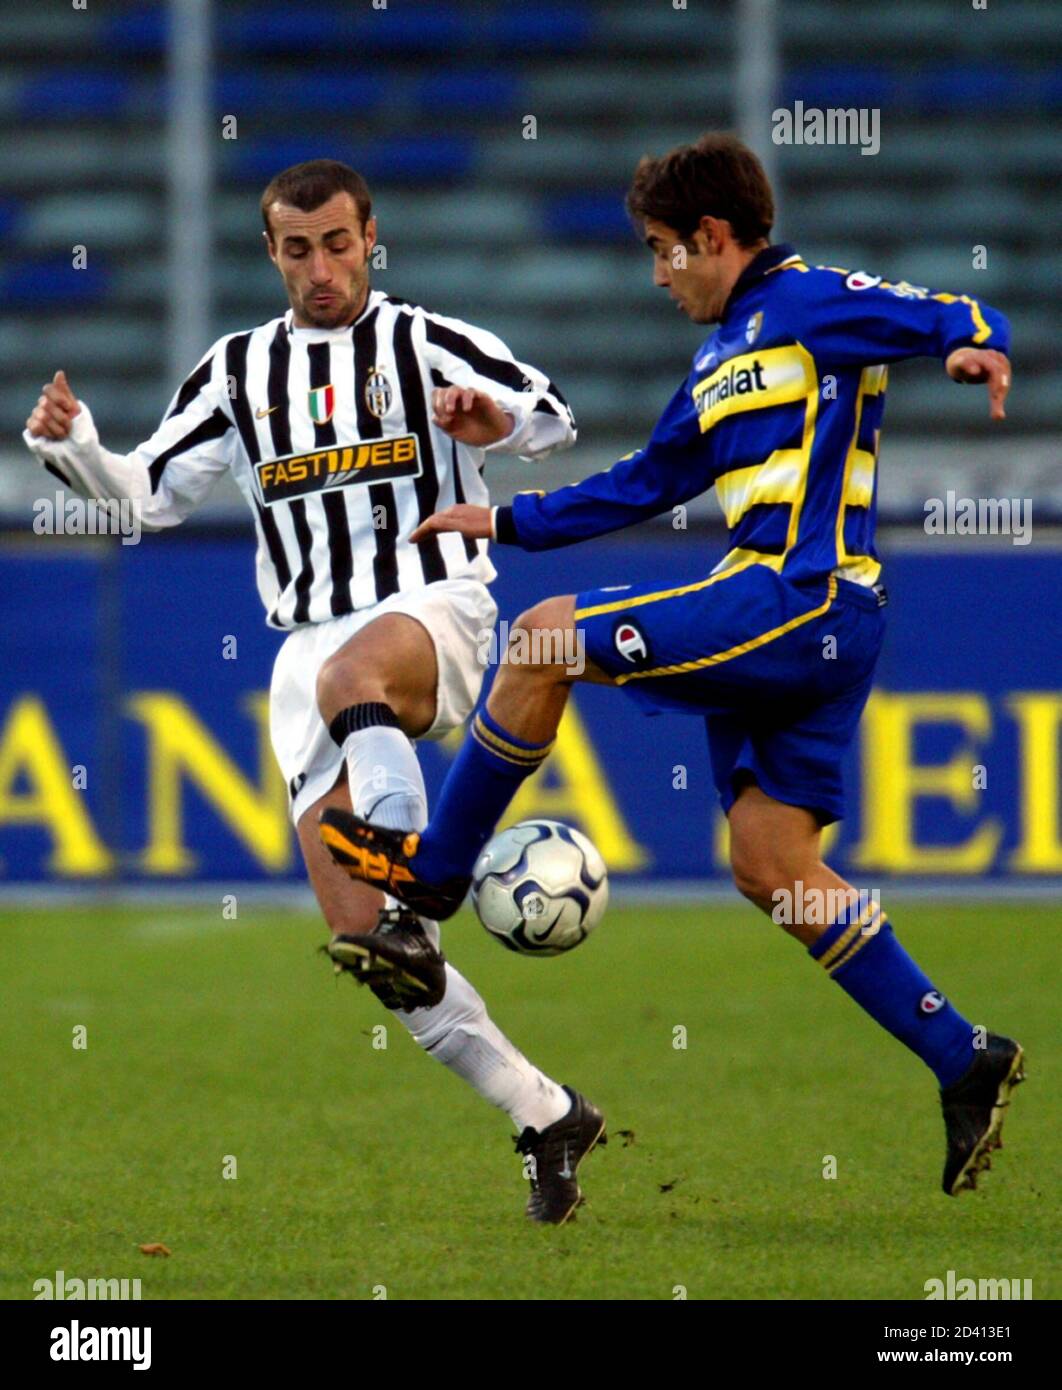 Juventus's Paolo Montero (L) challenges Parma's Marco Marchionni during their Serie A soccer match at the Delle Alpi Stadium in Turin December 14, 2003. Juventus won the match 4-0. REUTERS/ Giampiero Sposito  GS/JV Stock Photo